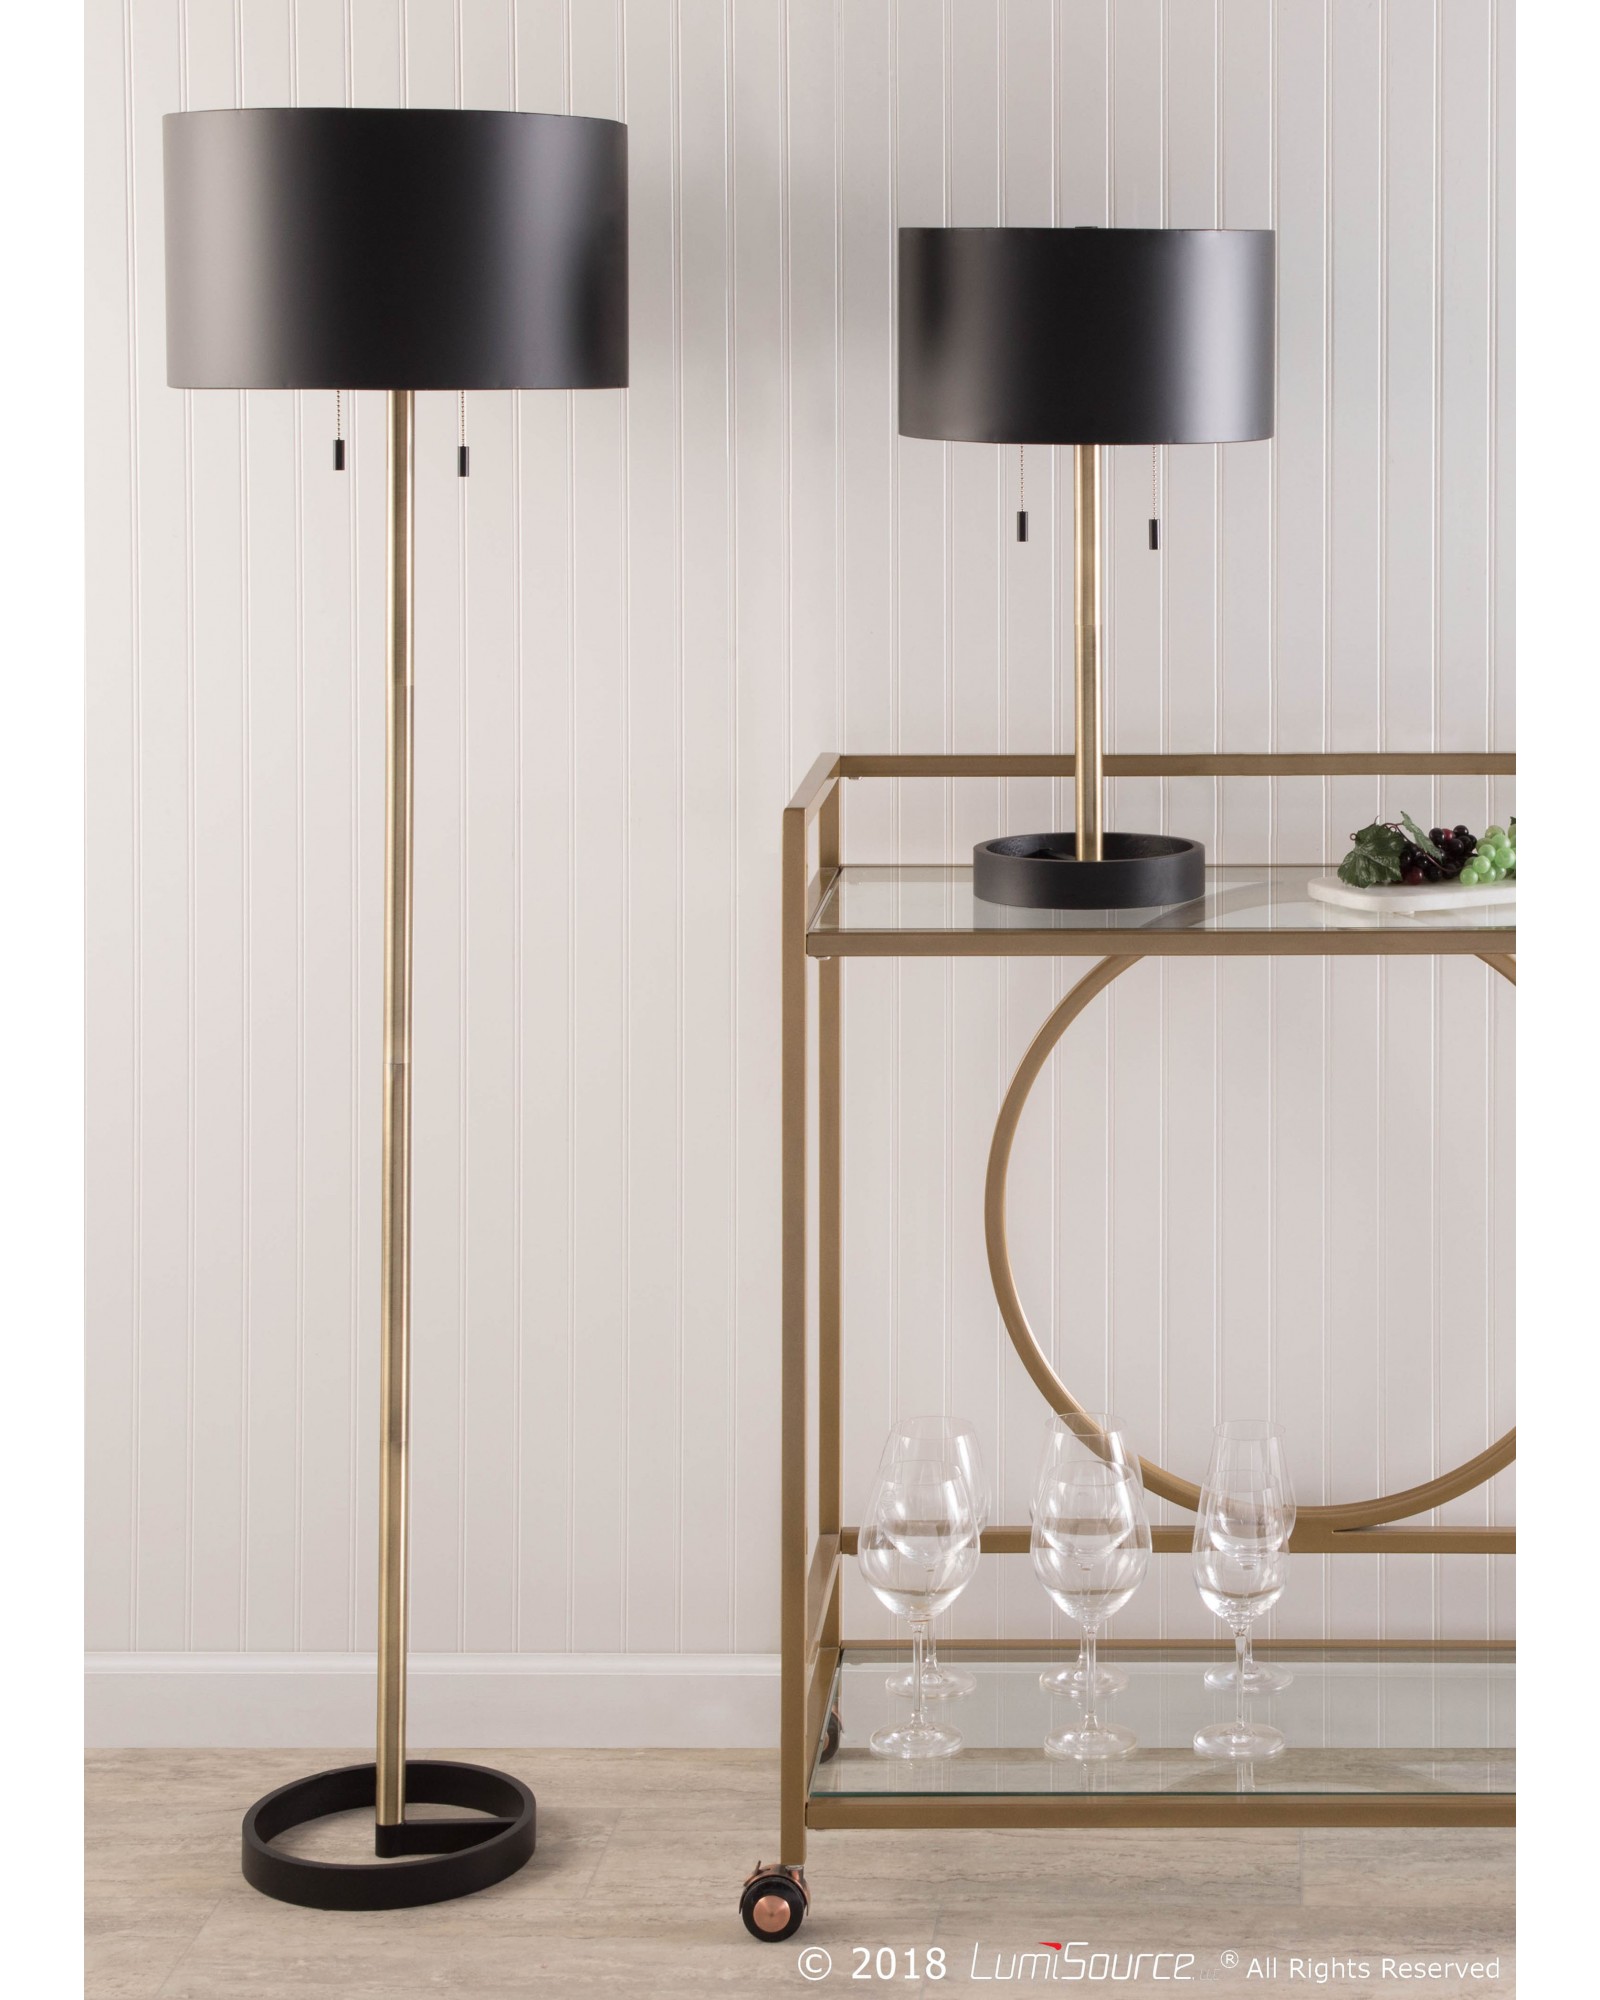 Hilton Contemporary Floor Lamp in Black with Gold Accents